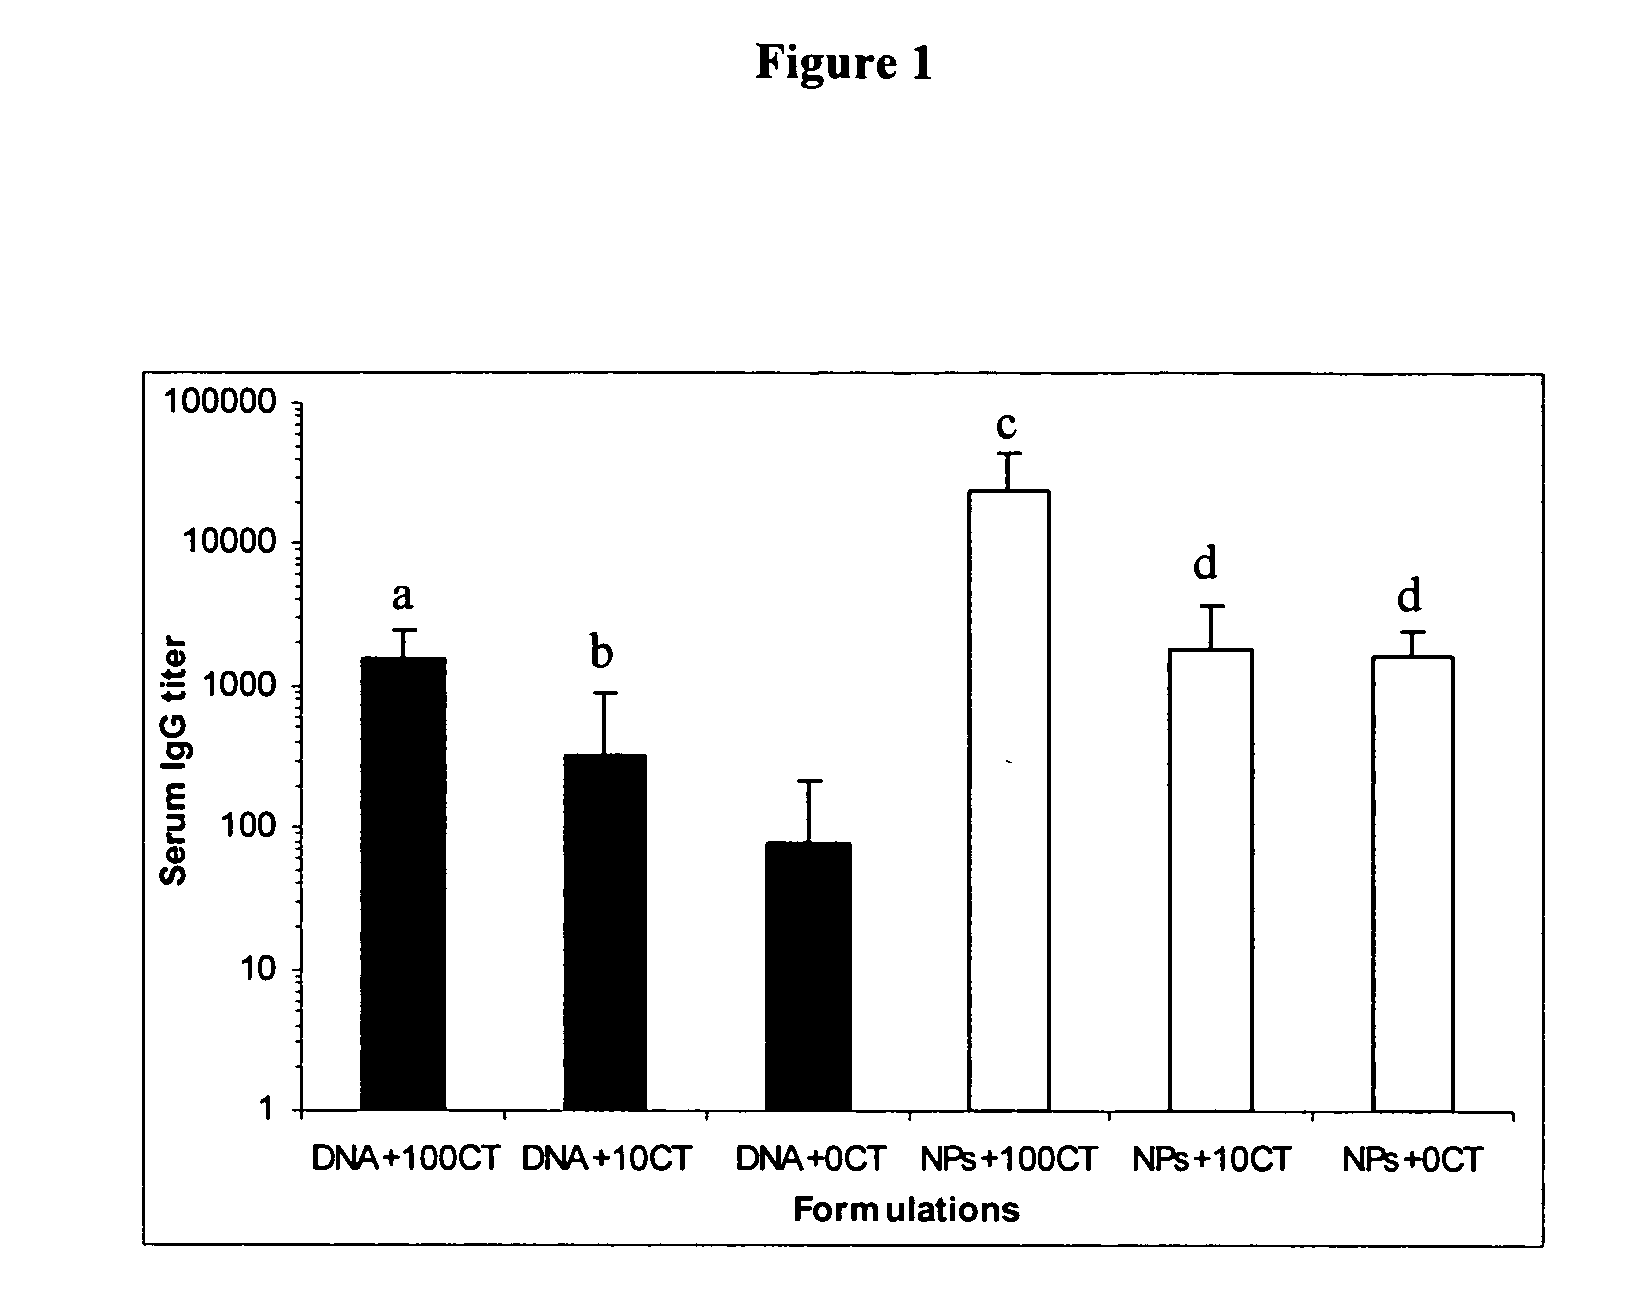 Nanoparticle-Based vaccine delivery system containing adjuvant